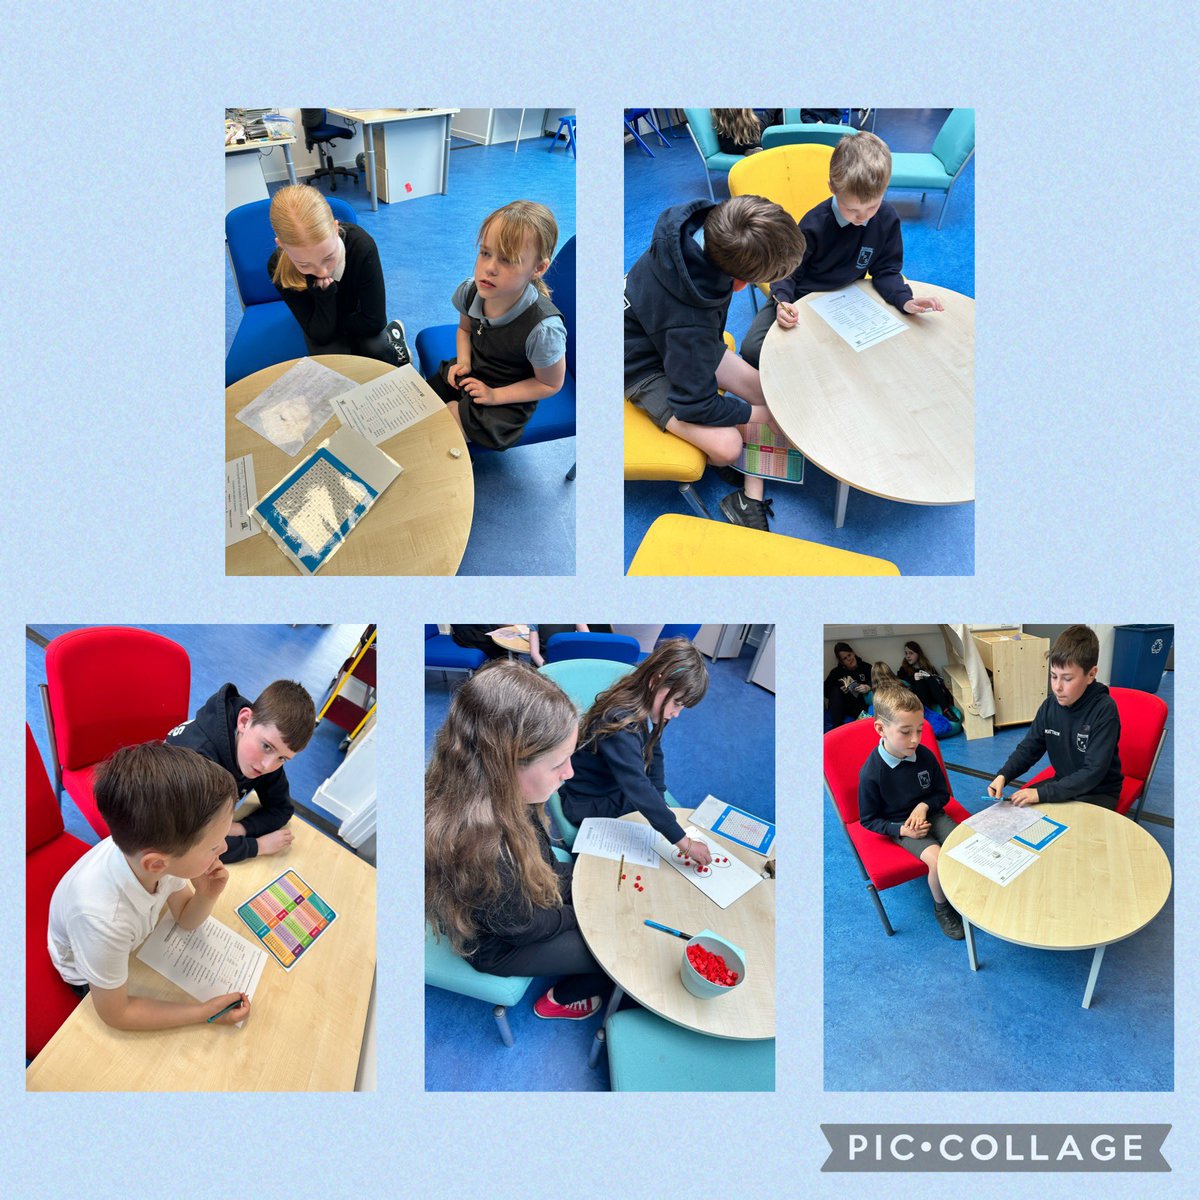 P7 pupils supporting P3 pupils with some tricky fraction problems 🧮 Excellent discussion, teaching and learning on display! Well done to all of our learners. #growdreamachievetogether